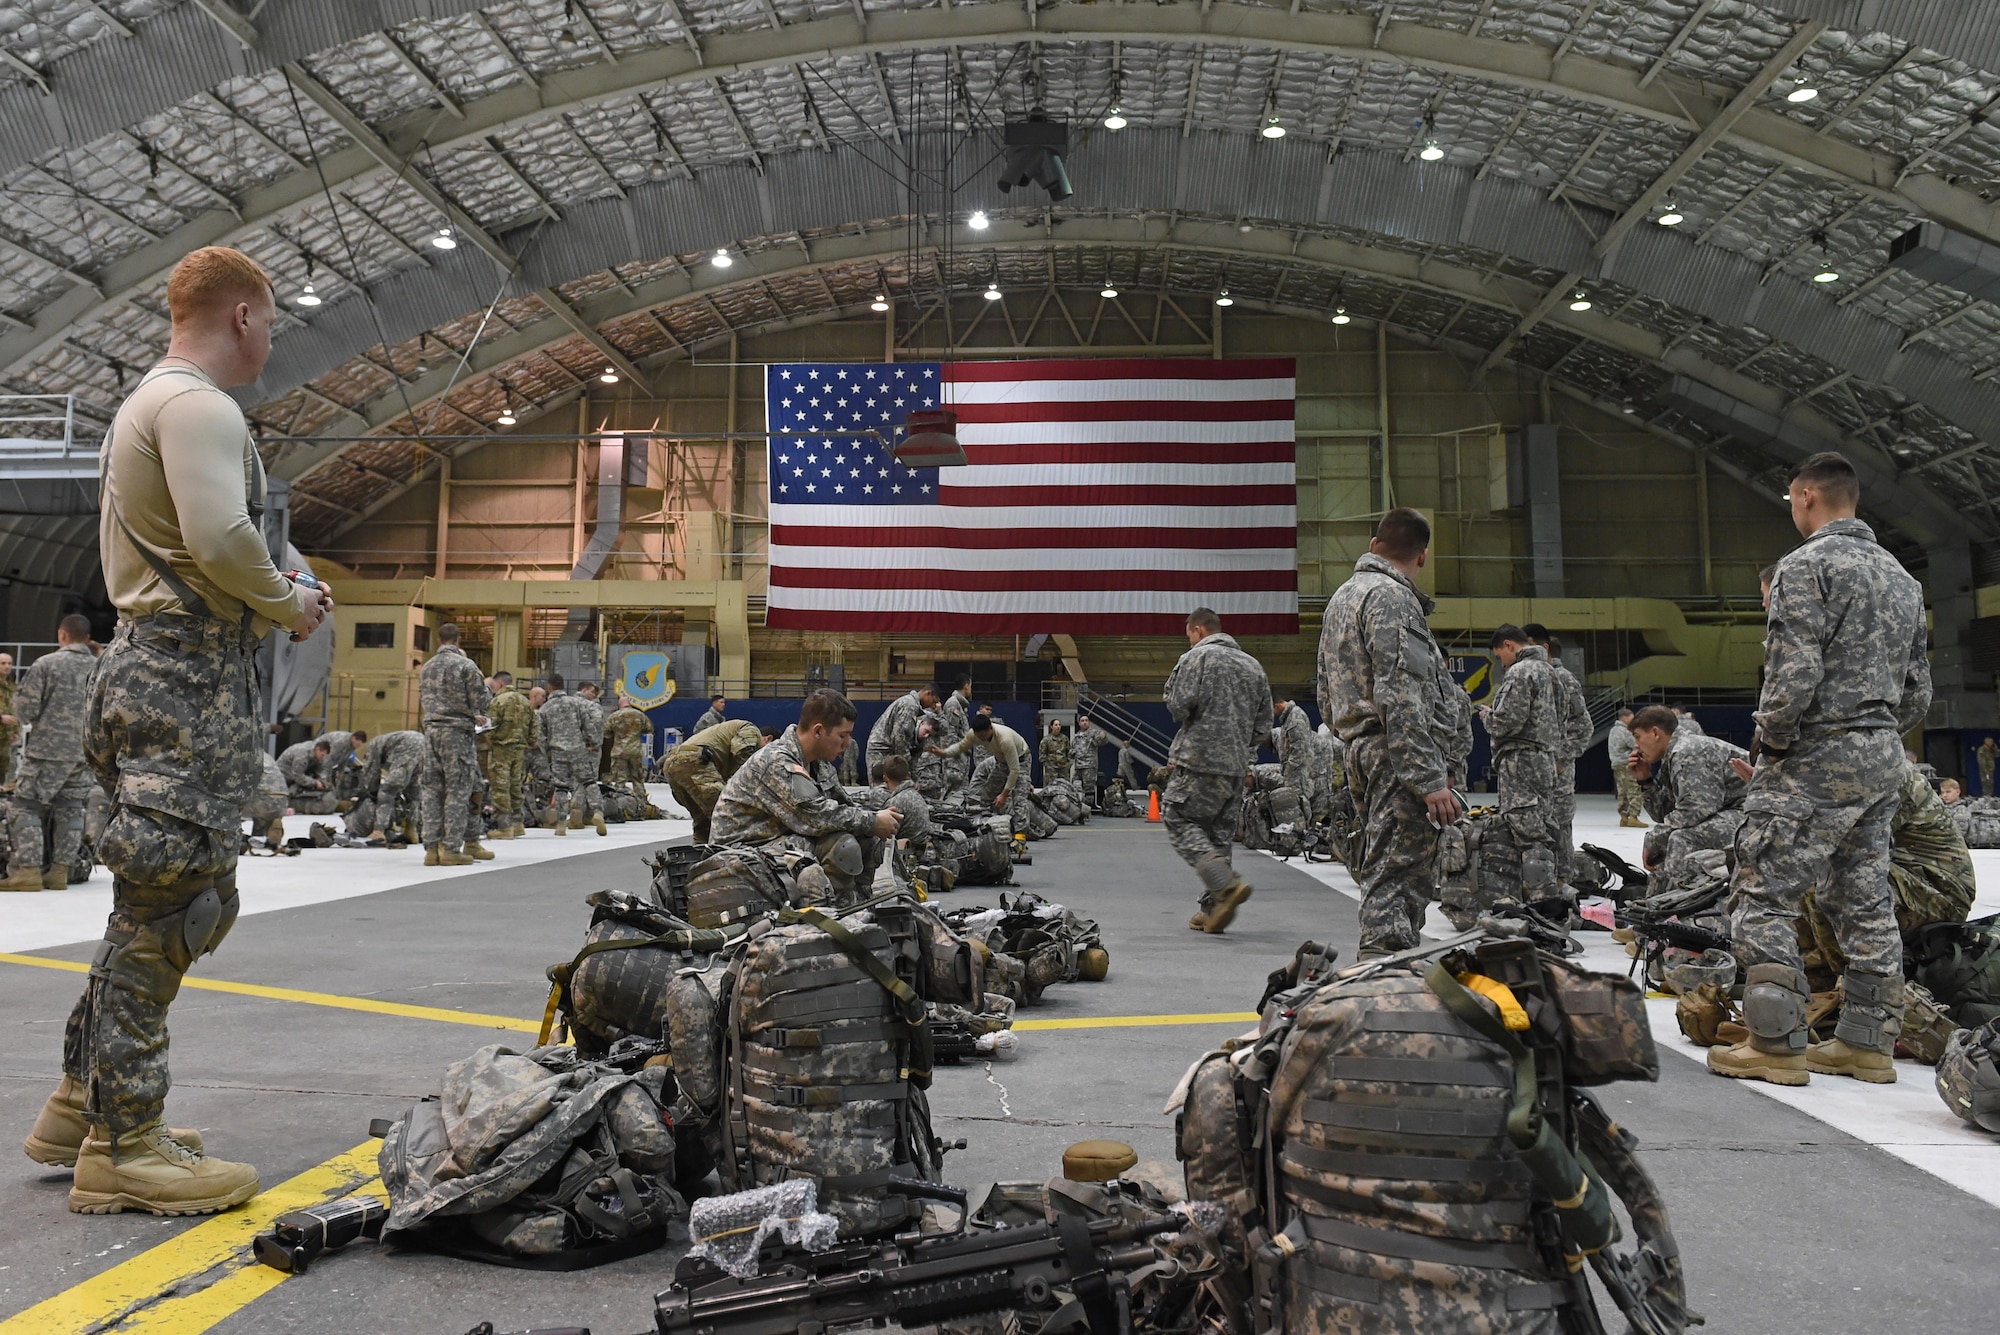 Paratroopers with the 4th Infantry Brigade Combat Team (Airborne), 25th Infantry Division, U.S. Army Alaska, gather at Hangar 1 before a jump at Joint Base Elmendorf-Richardson, Alaska, Oct. 12, 2016. The jump was part of Red Flag-Alaska 17-1, a training exercise for U.S. and international forces flown under simulated air combat conditions. 